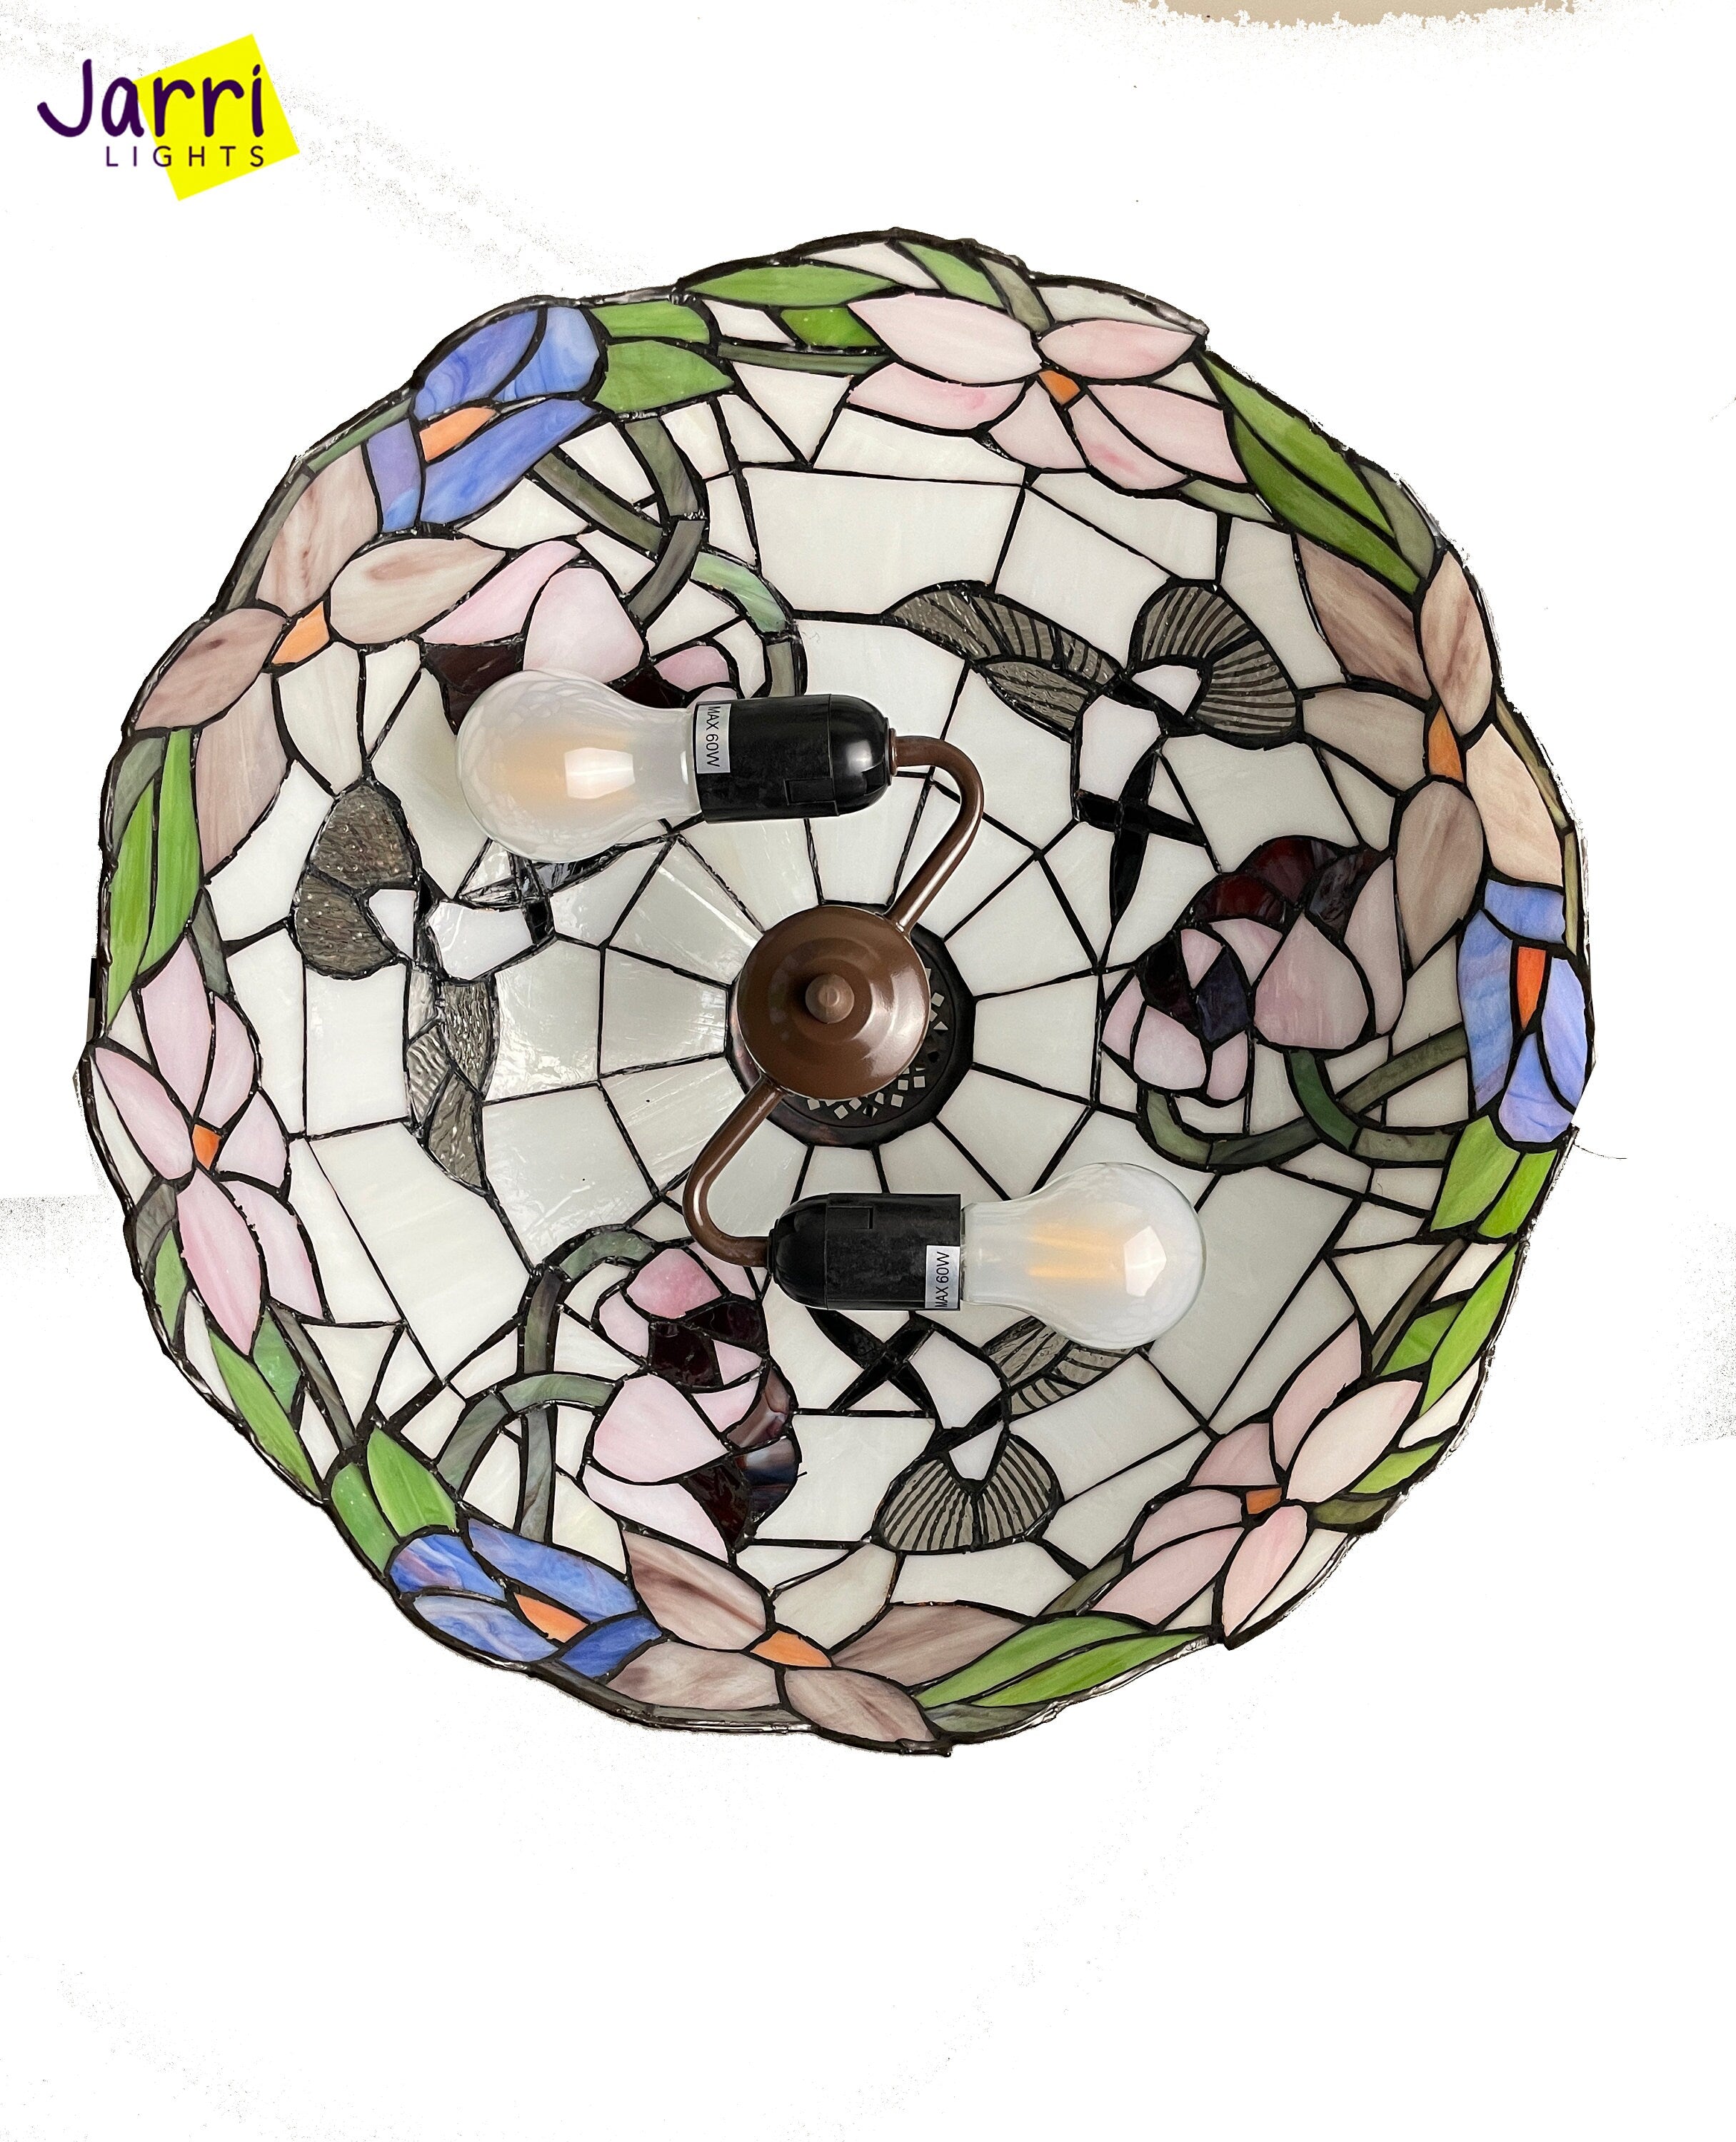 Tiffany Hanging Lamp 16in, Humming Bird Leadglass Stained Glass Crystal Bead Lampshade, Chandelier, Pendant Light, Dining Kitchen Lamp